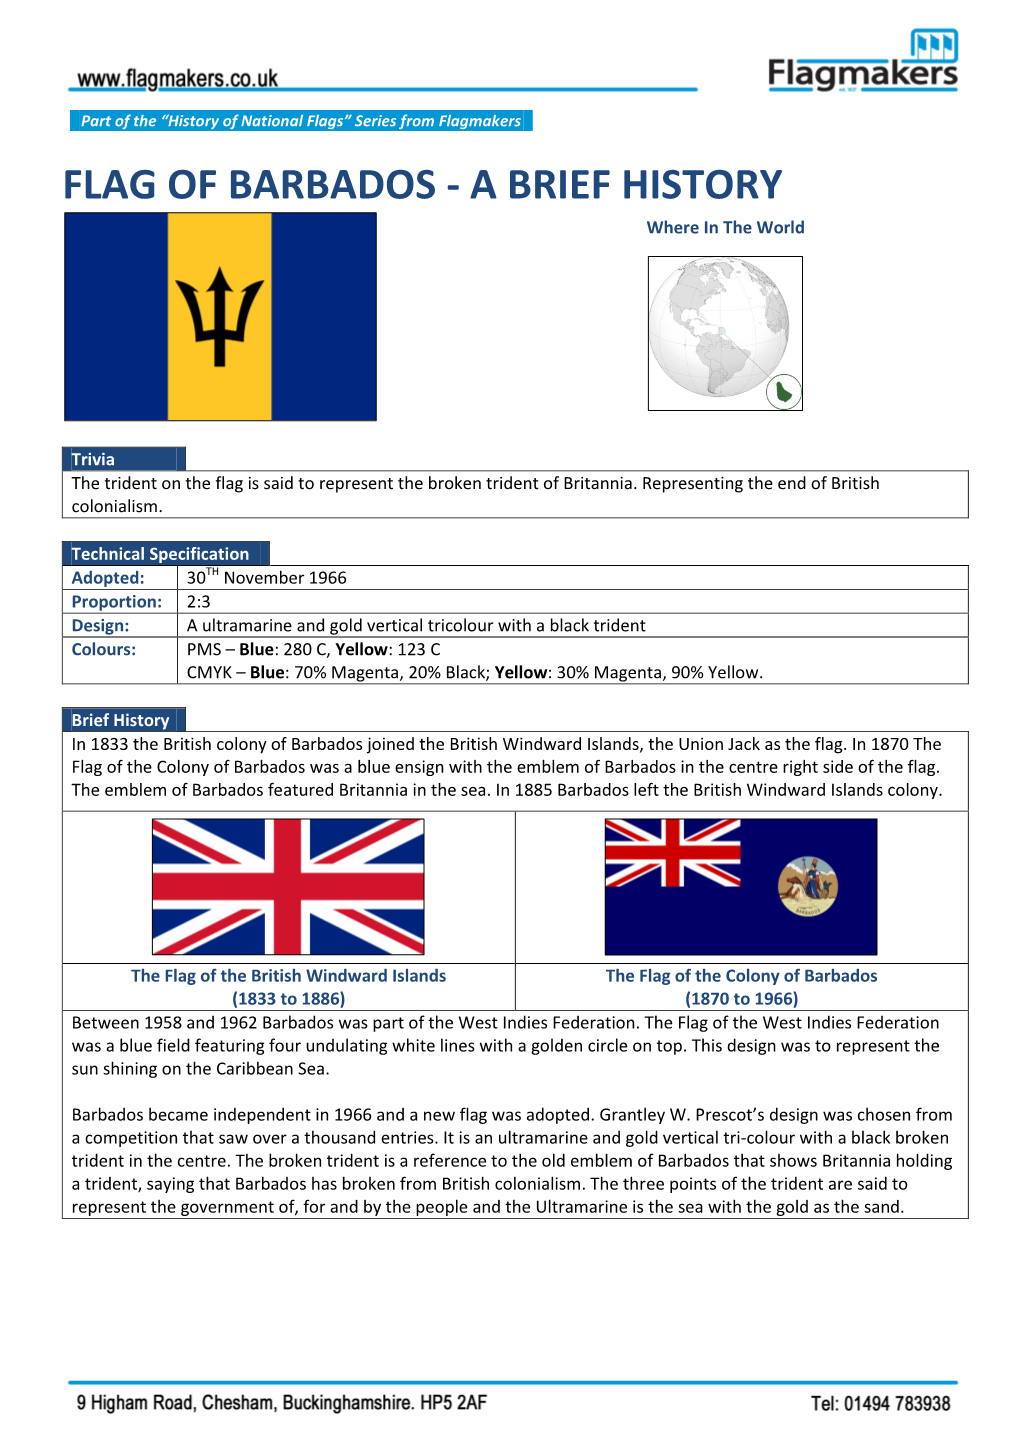 FLAG of BARBADOS - a BRIEF HISTORY Where in the World